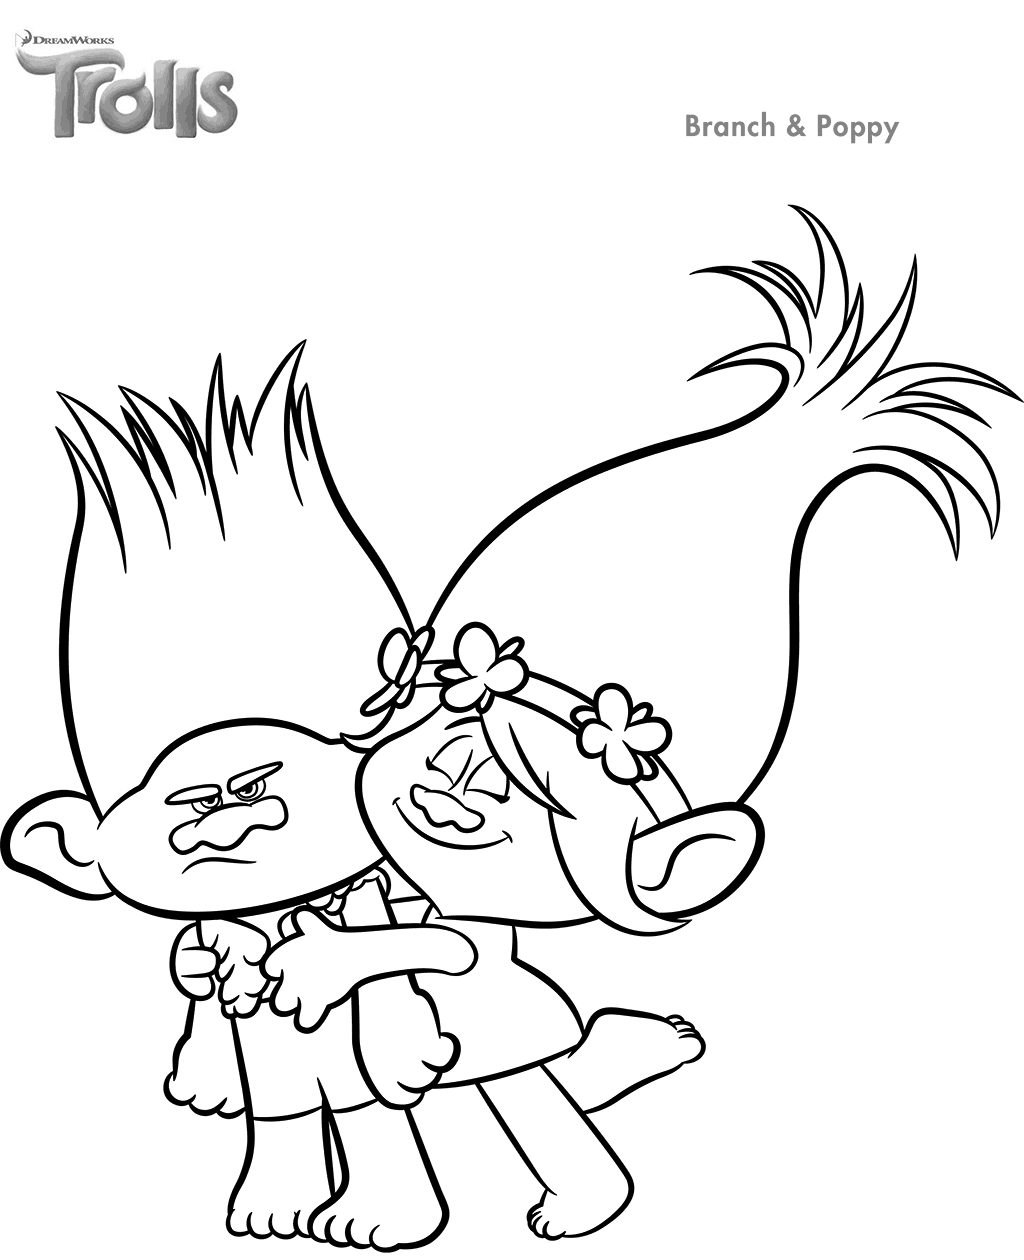 Trolls Movie Coloring Pages - Best Coloring Pages For Kids - Free Printable Troll Coloring Pages